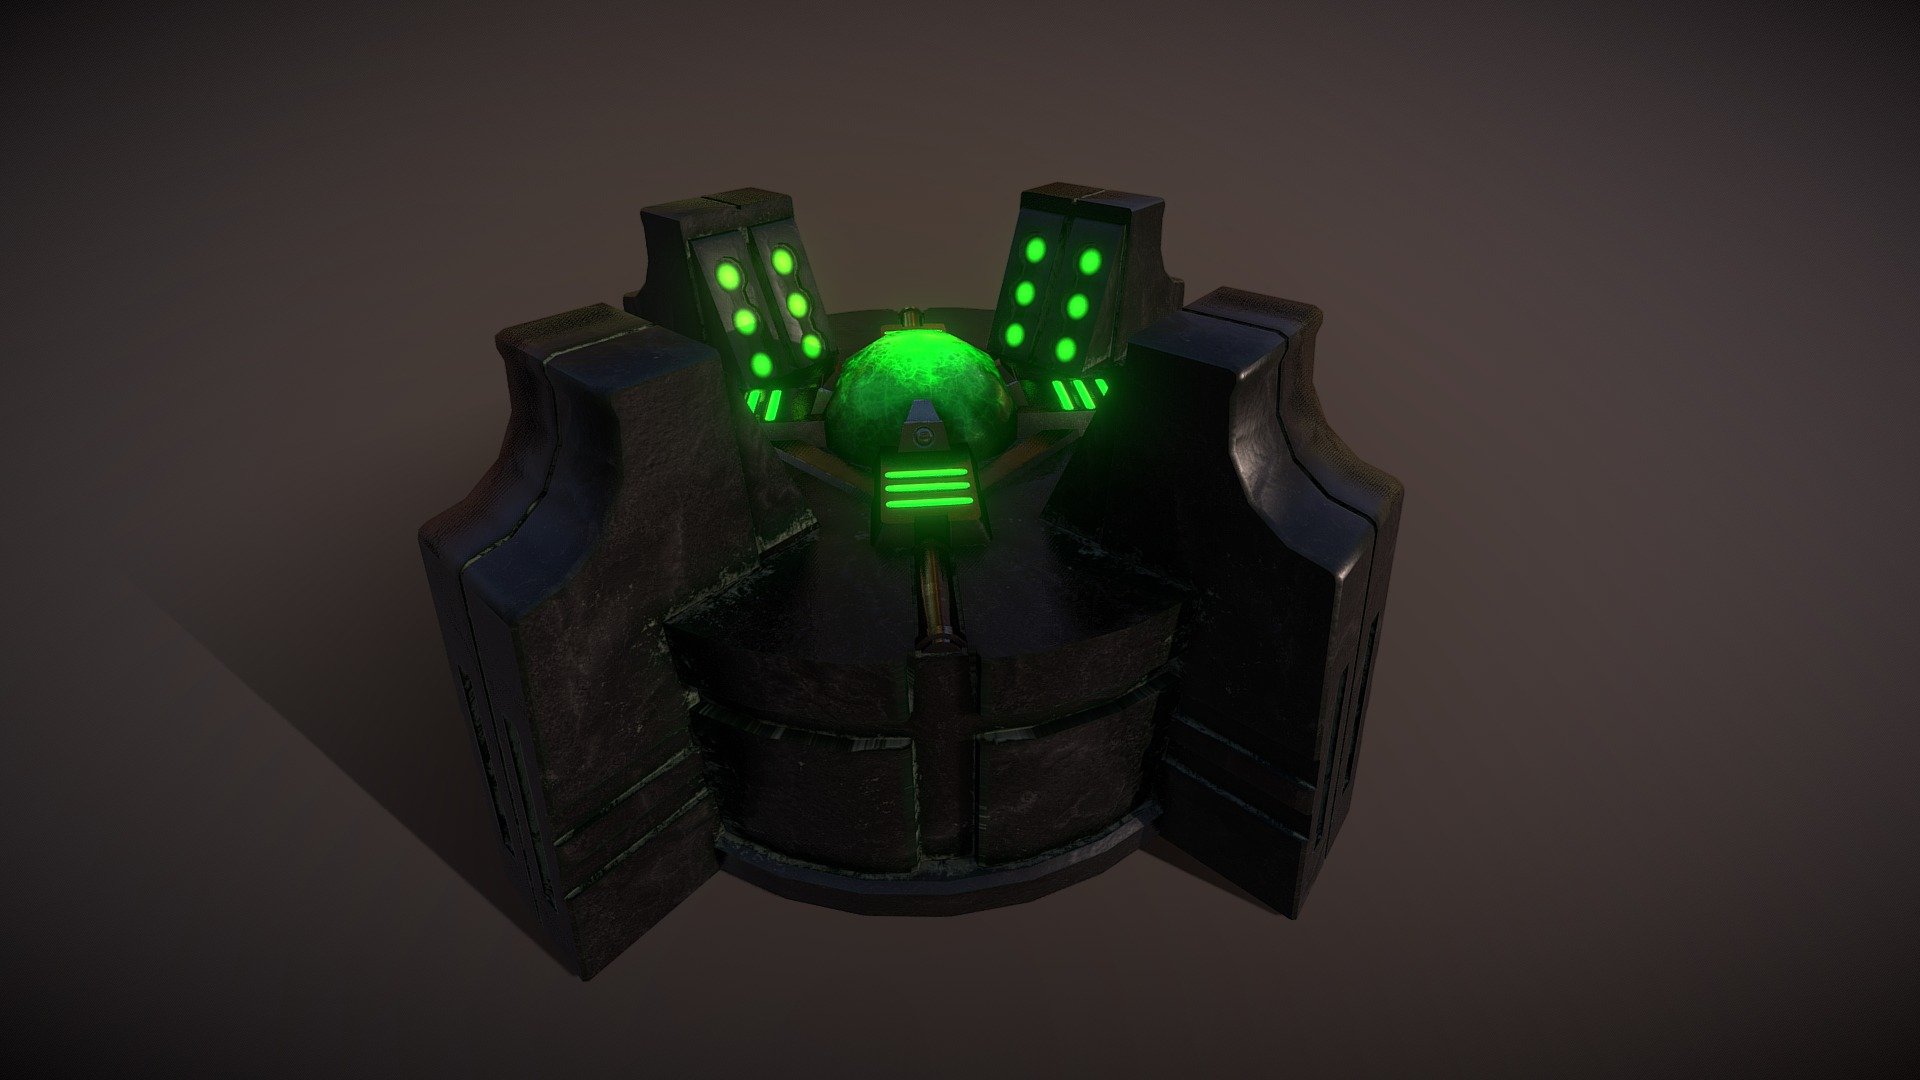 made about a year and a half ago - Necron Power Generator - 3D model by zetoominator (@toomey) 3d model